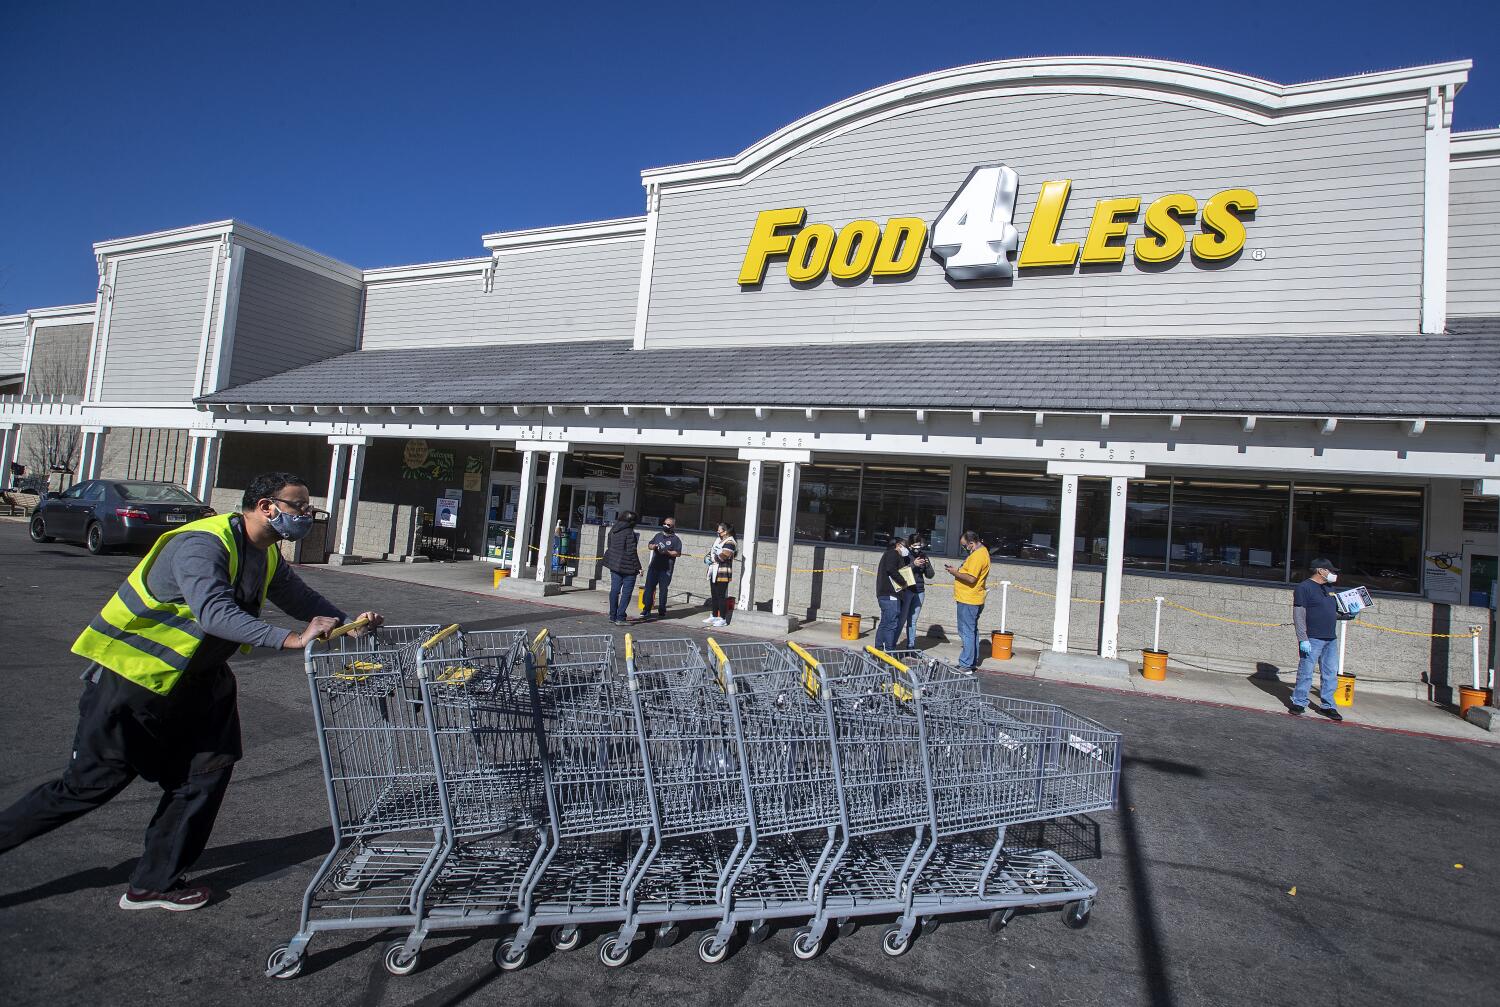 Food 4 Less workers in California vote to authorize strike 